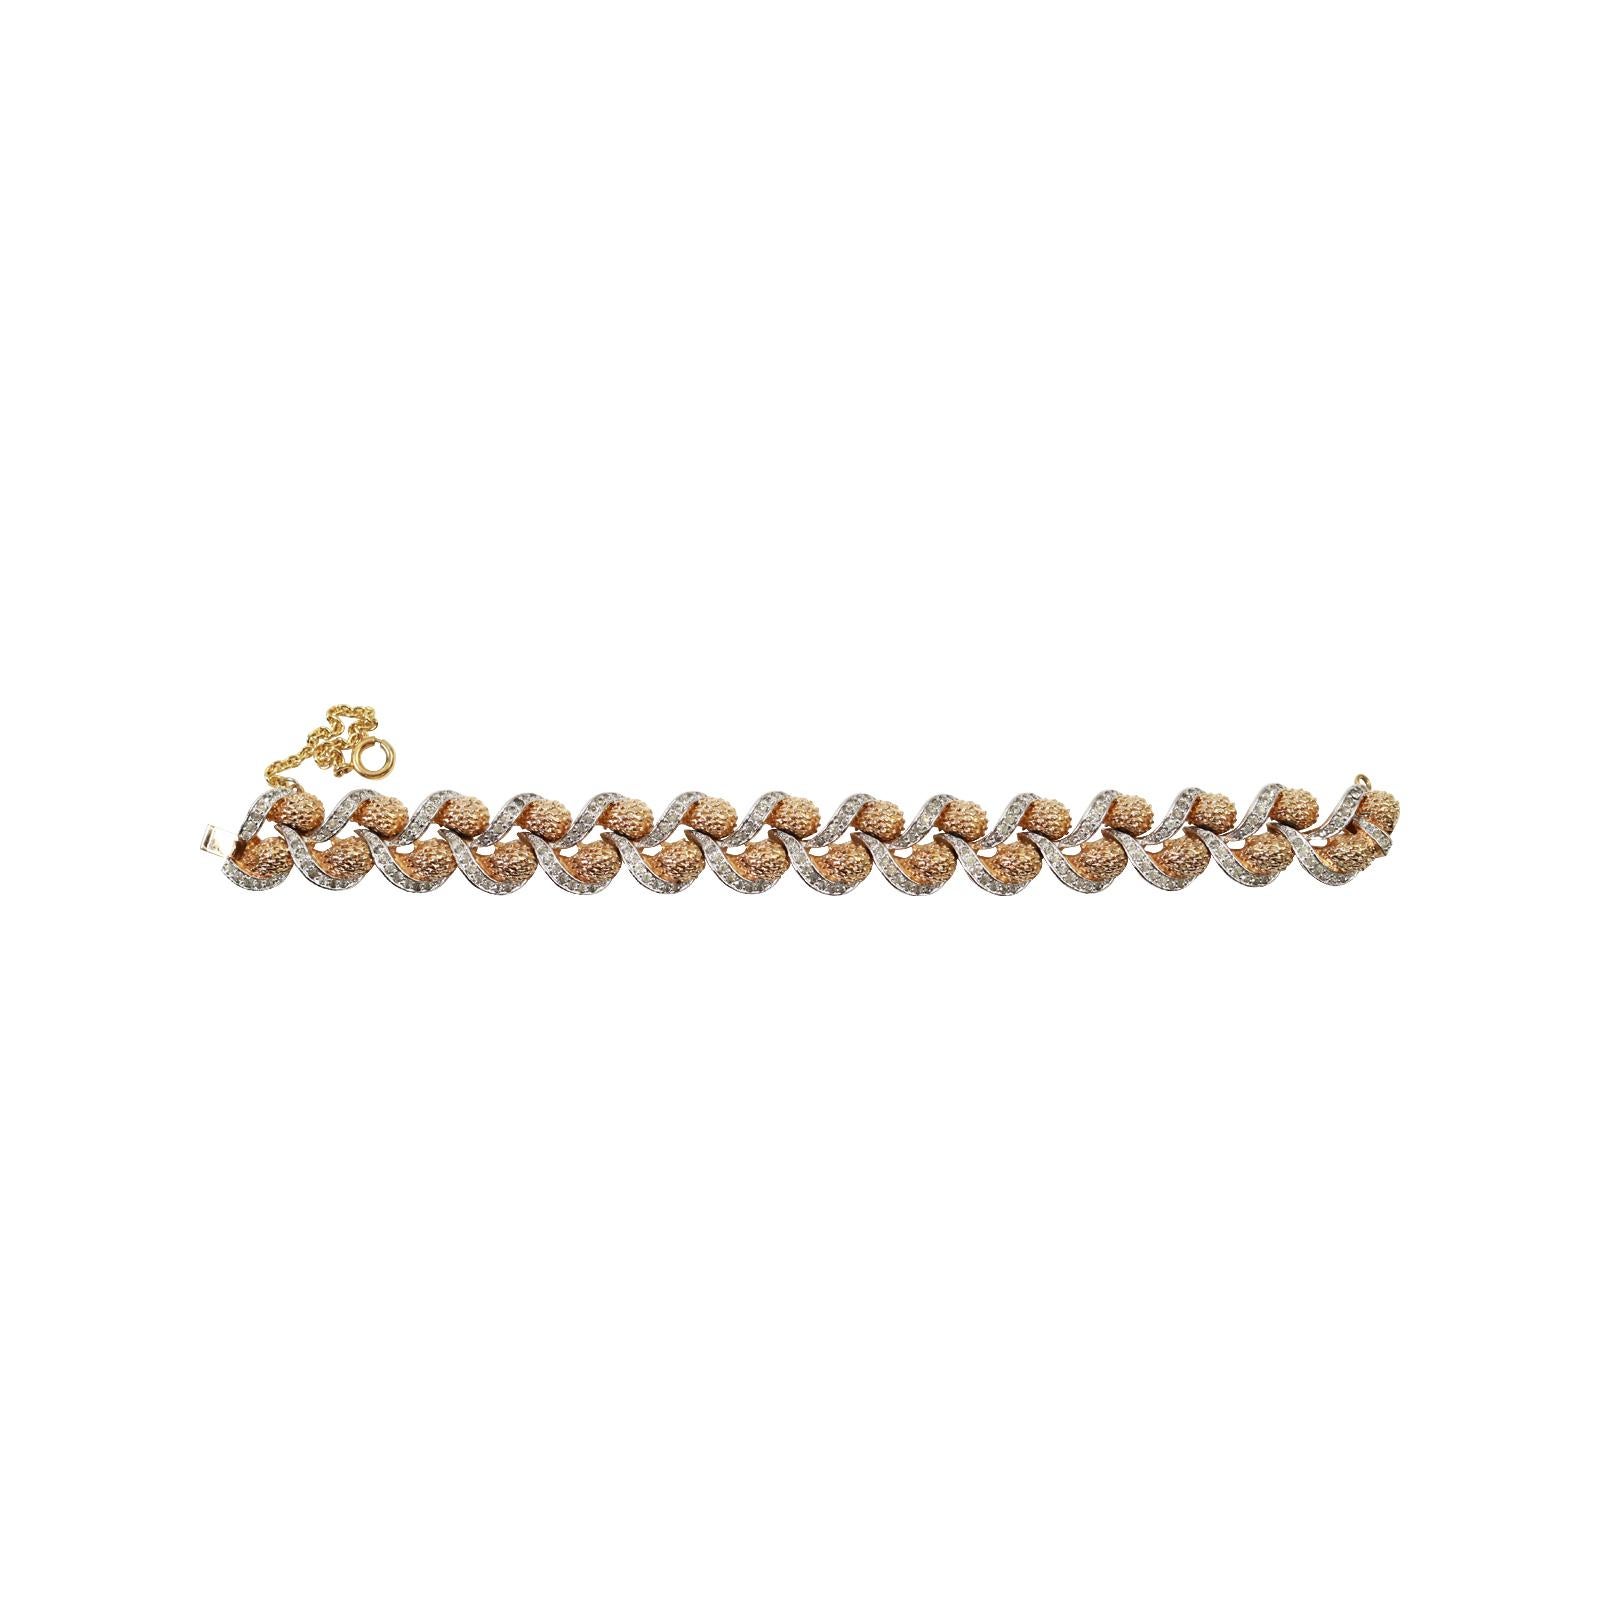 Women's Vintage Panetta Gold Braided Bracelet with Clear Pave Stones Circa 1960s For Sale